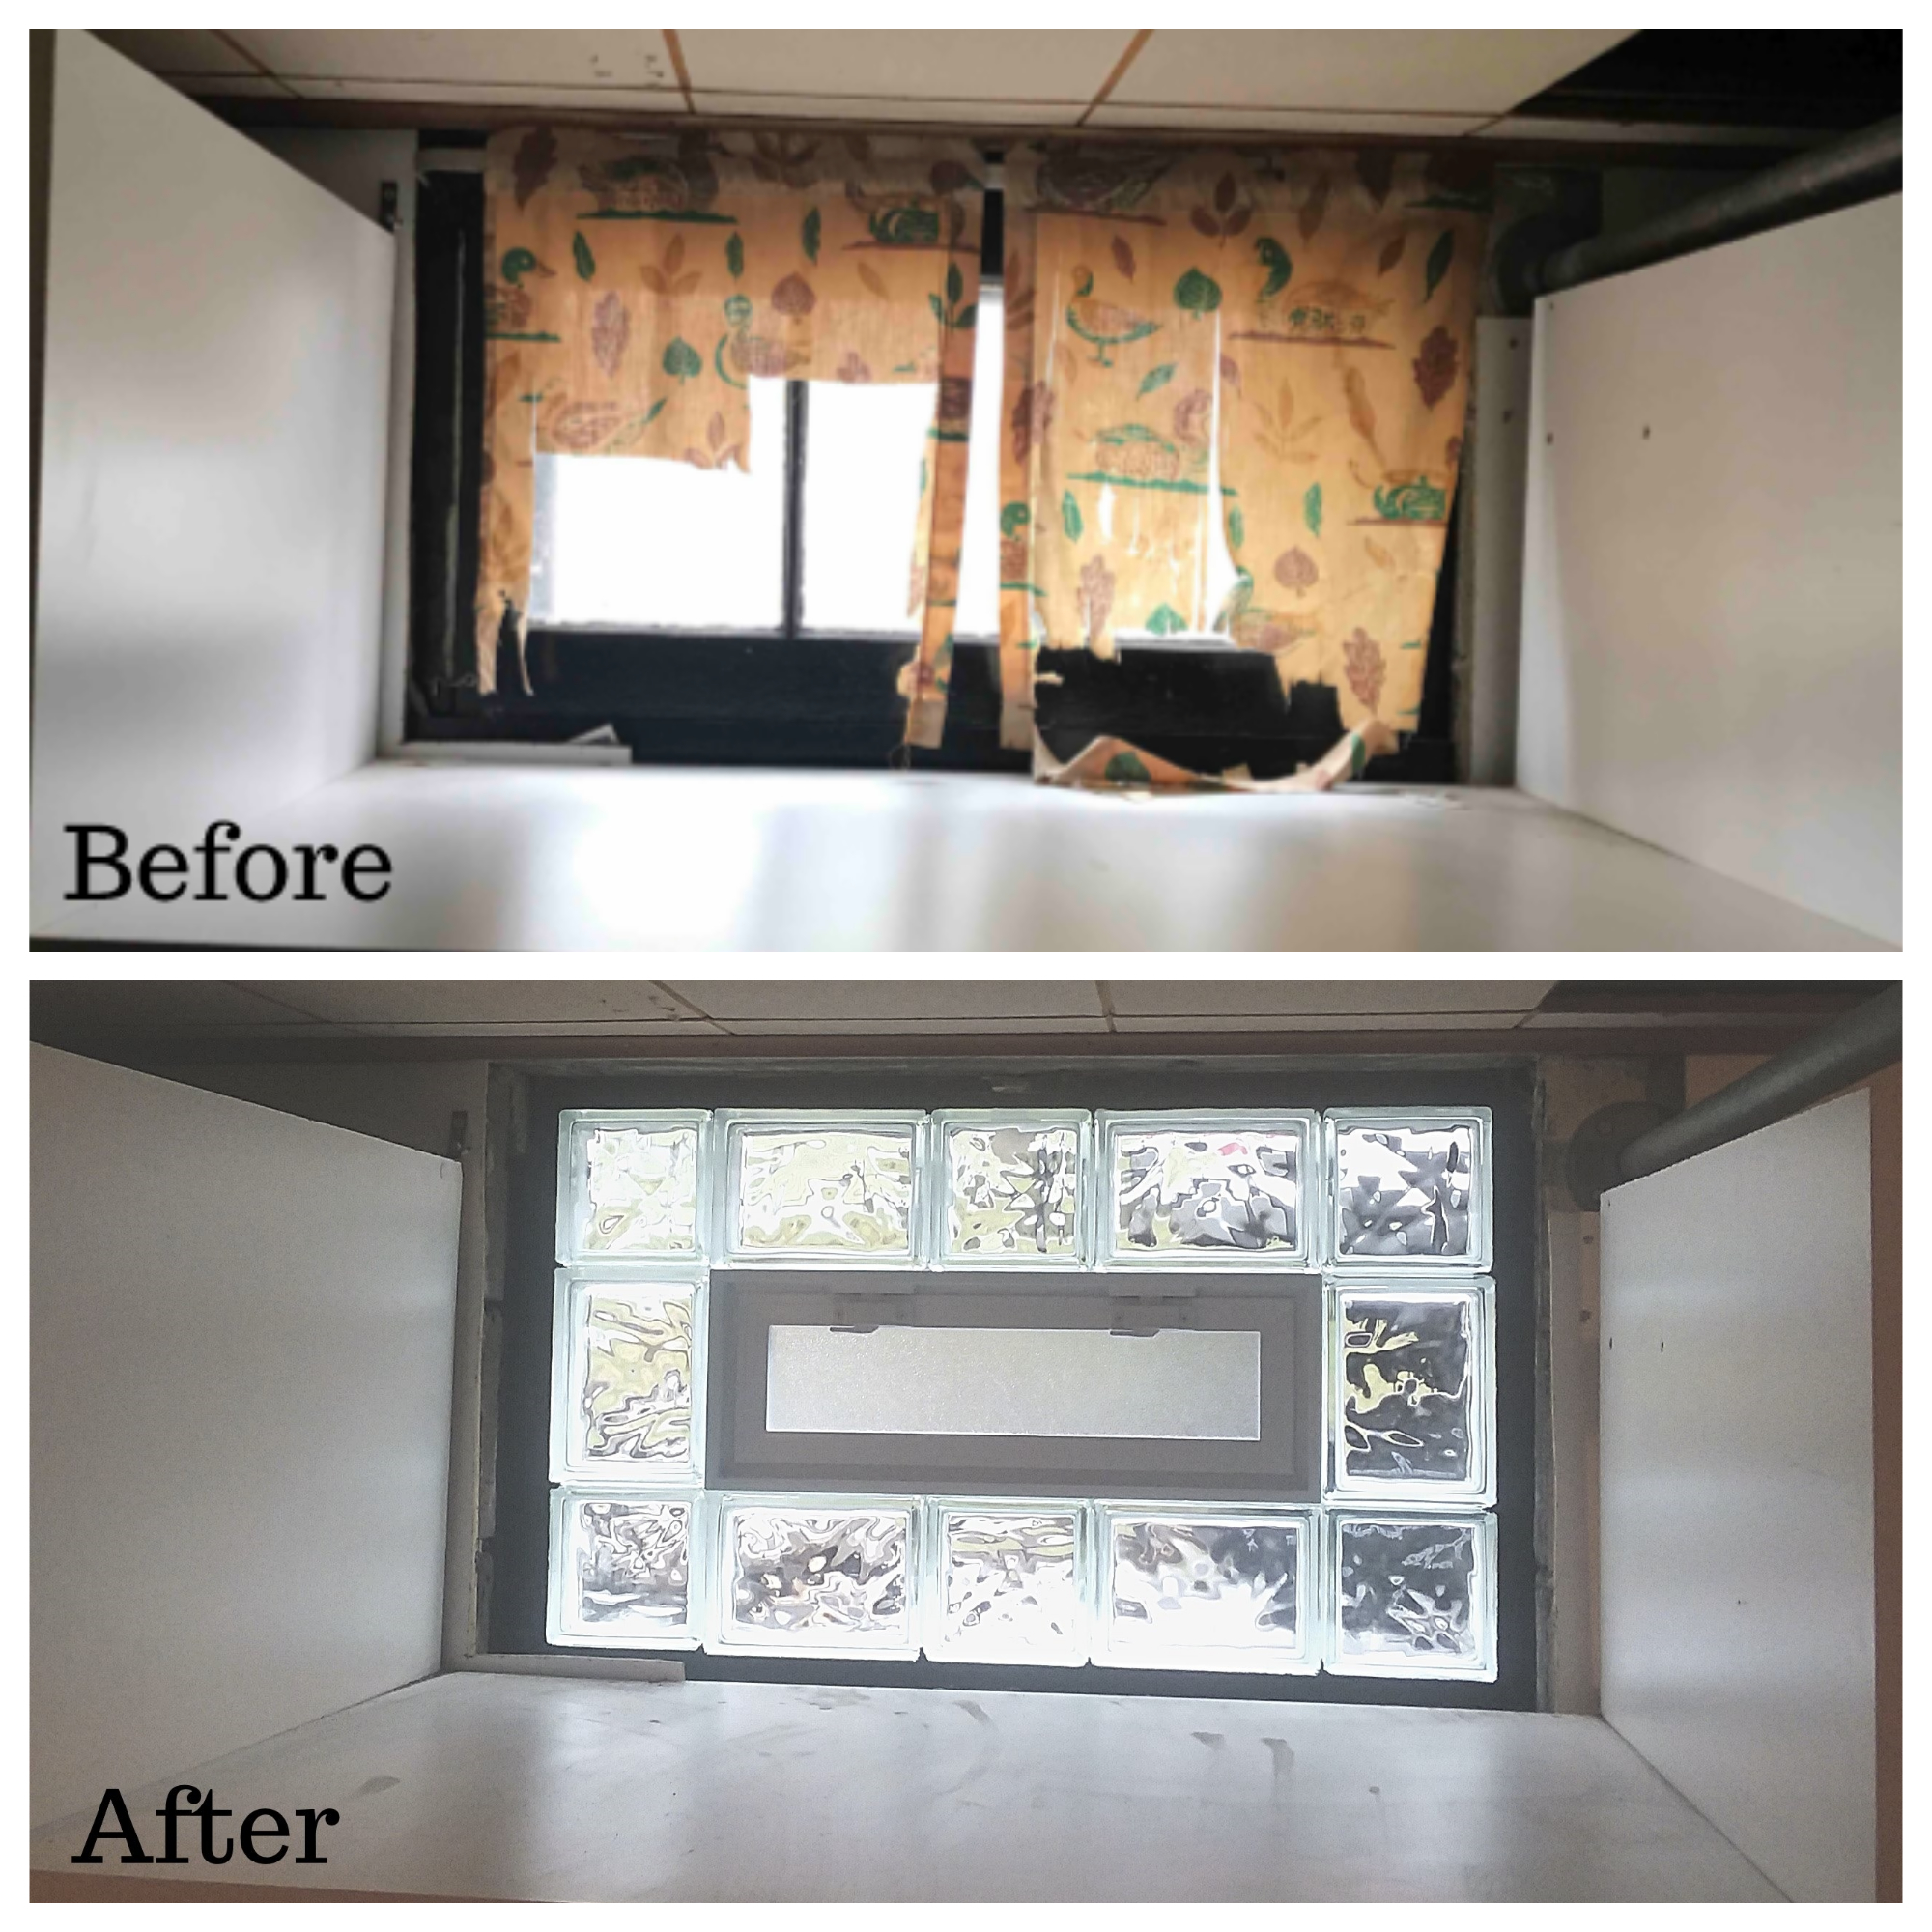 Before and After of Glass Block installation